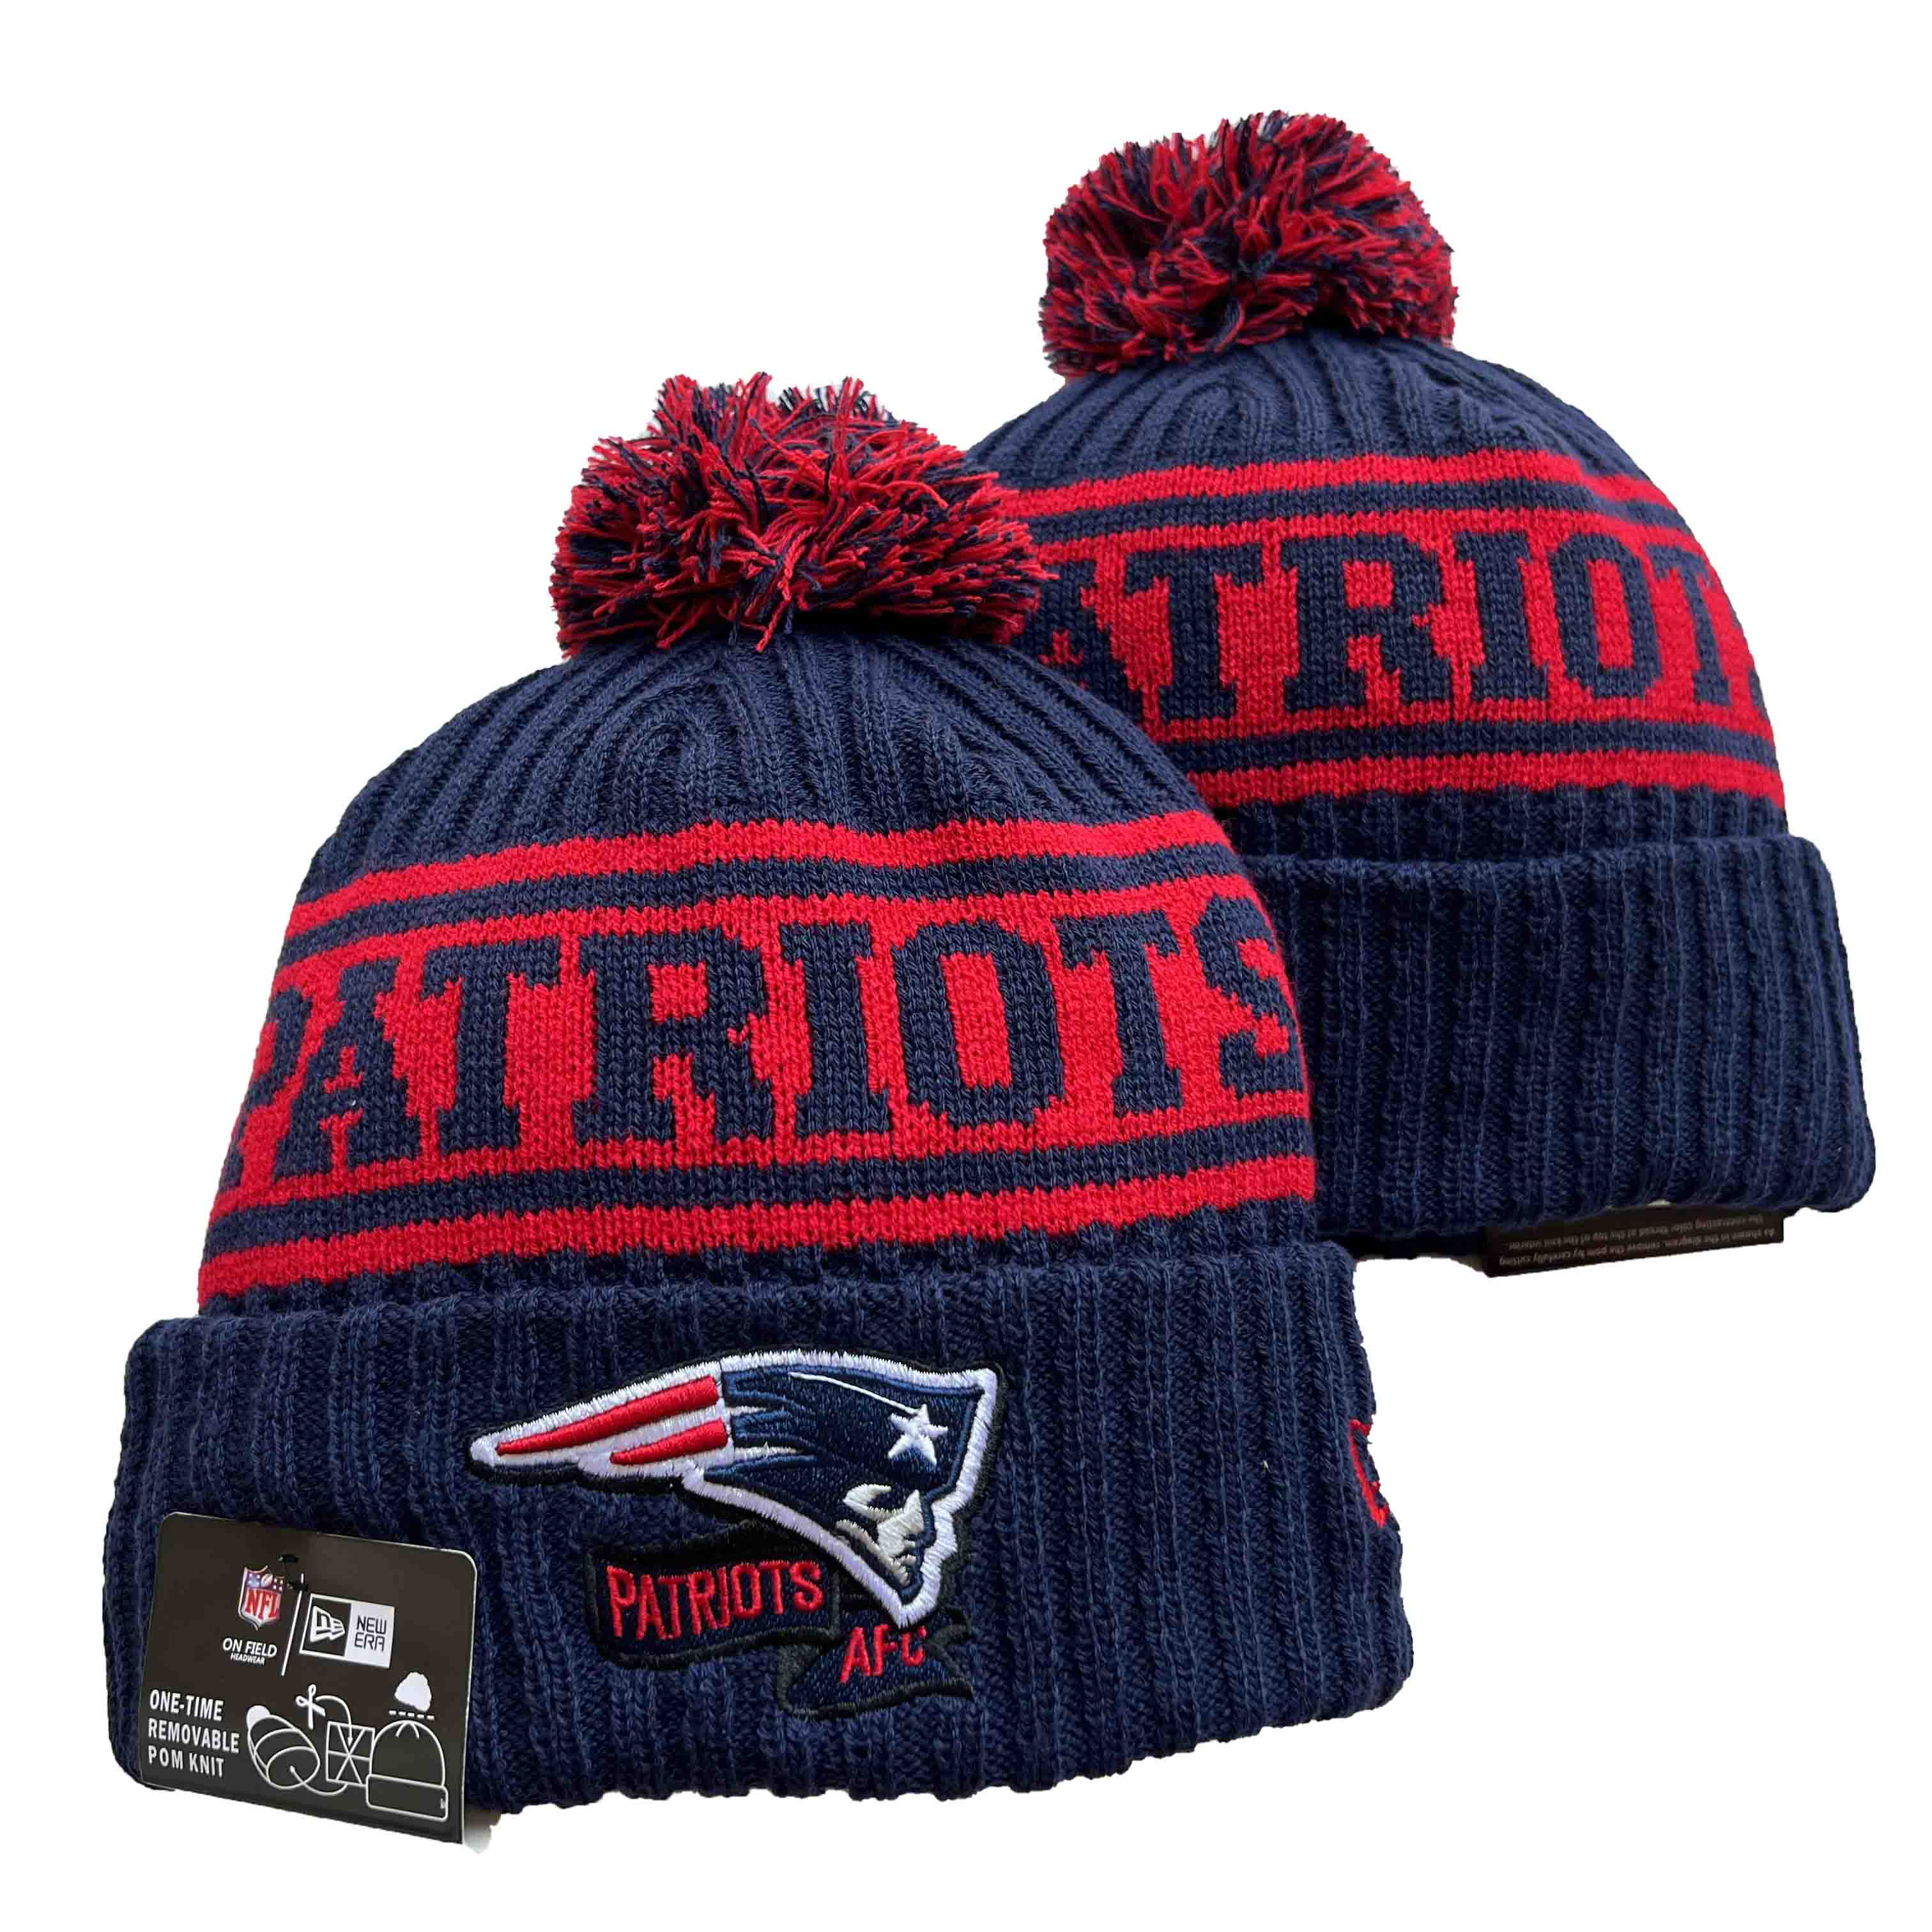 NFL New England Patriots Beanies Knit Hats-YD1250